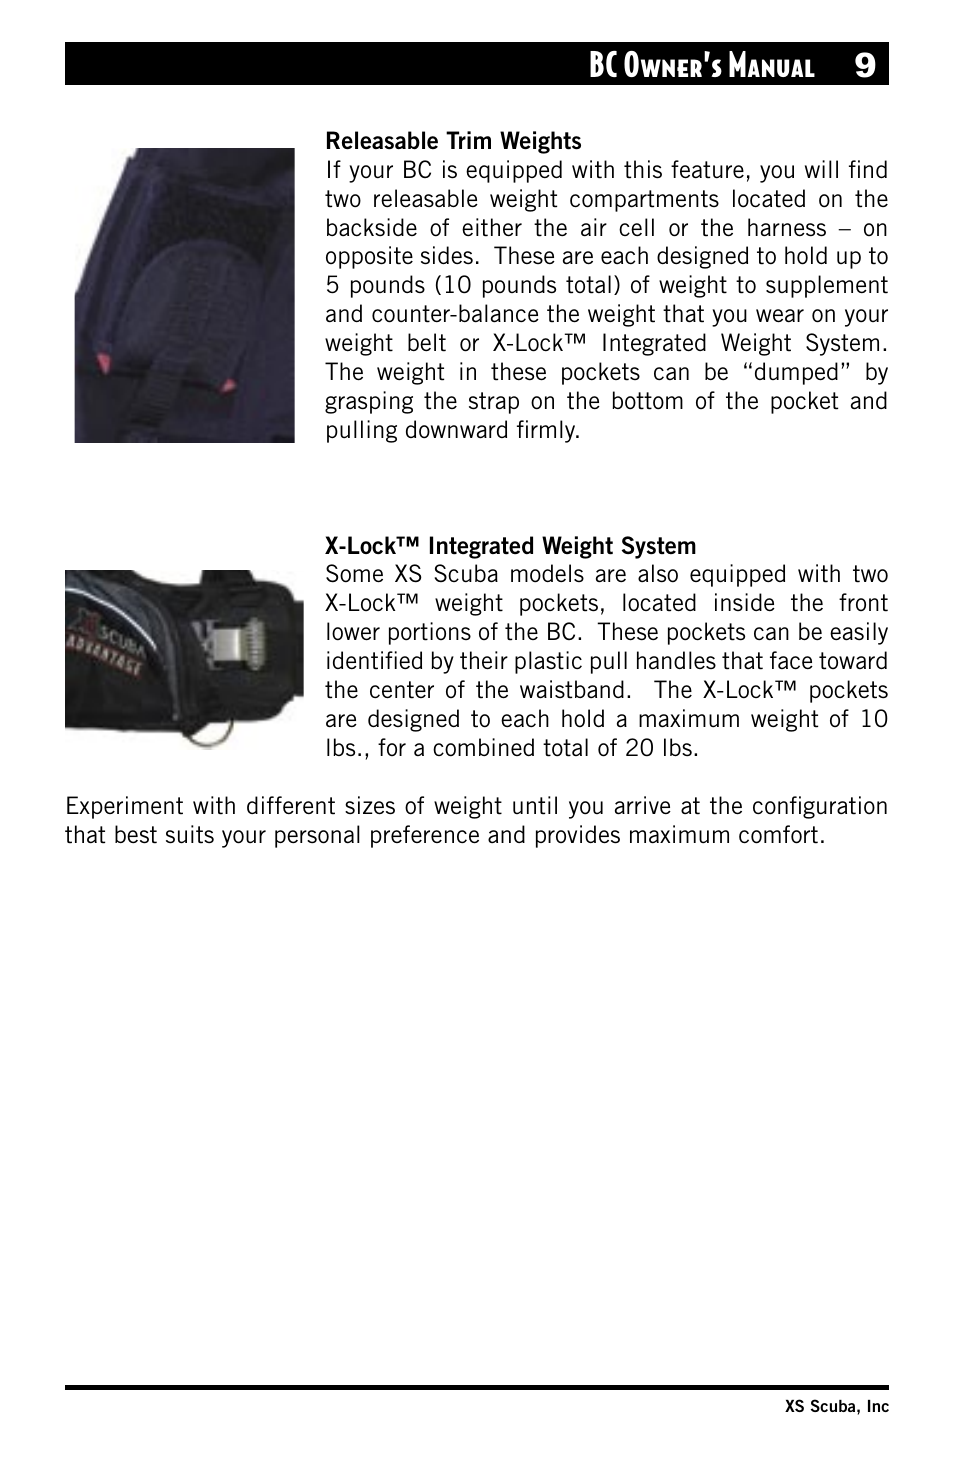 Releasable trim weights, X-lock™ integrated weight system, Bc owner’s manual 9 | XS Scuba Buoyancy Compensator User Manual | Page 9 / 24